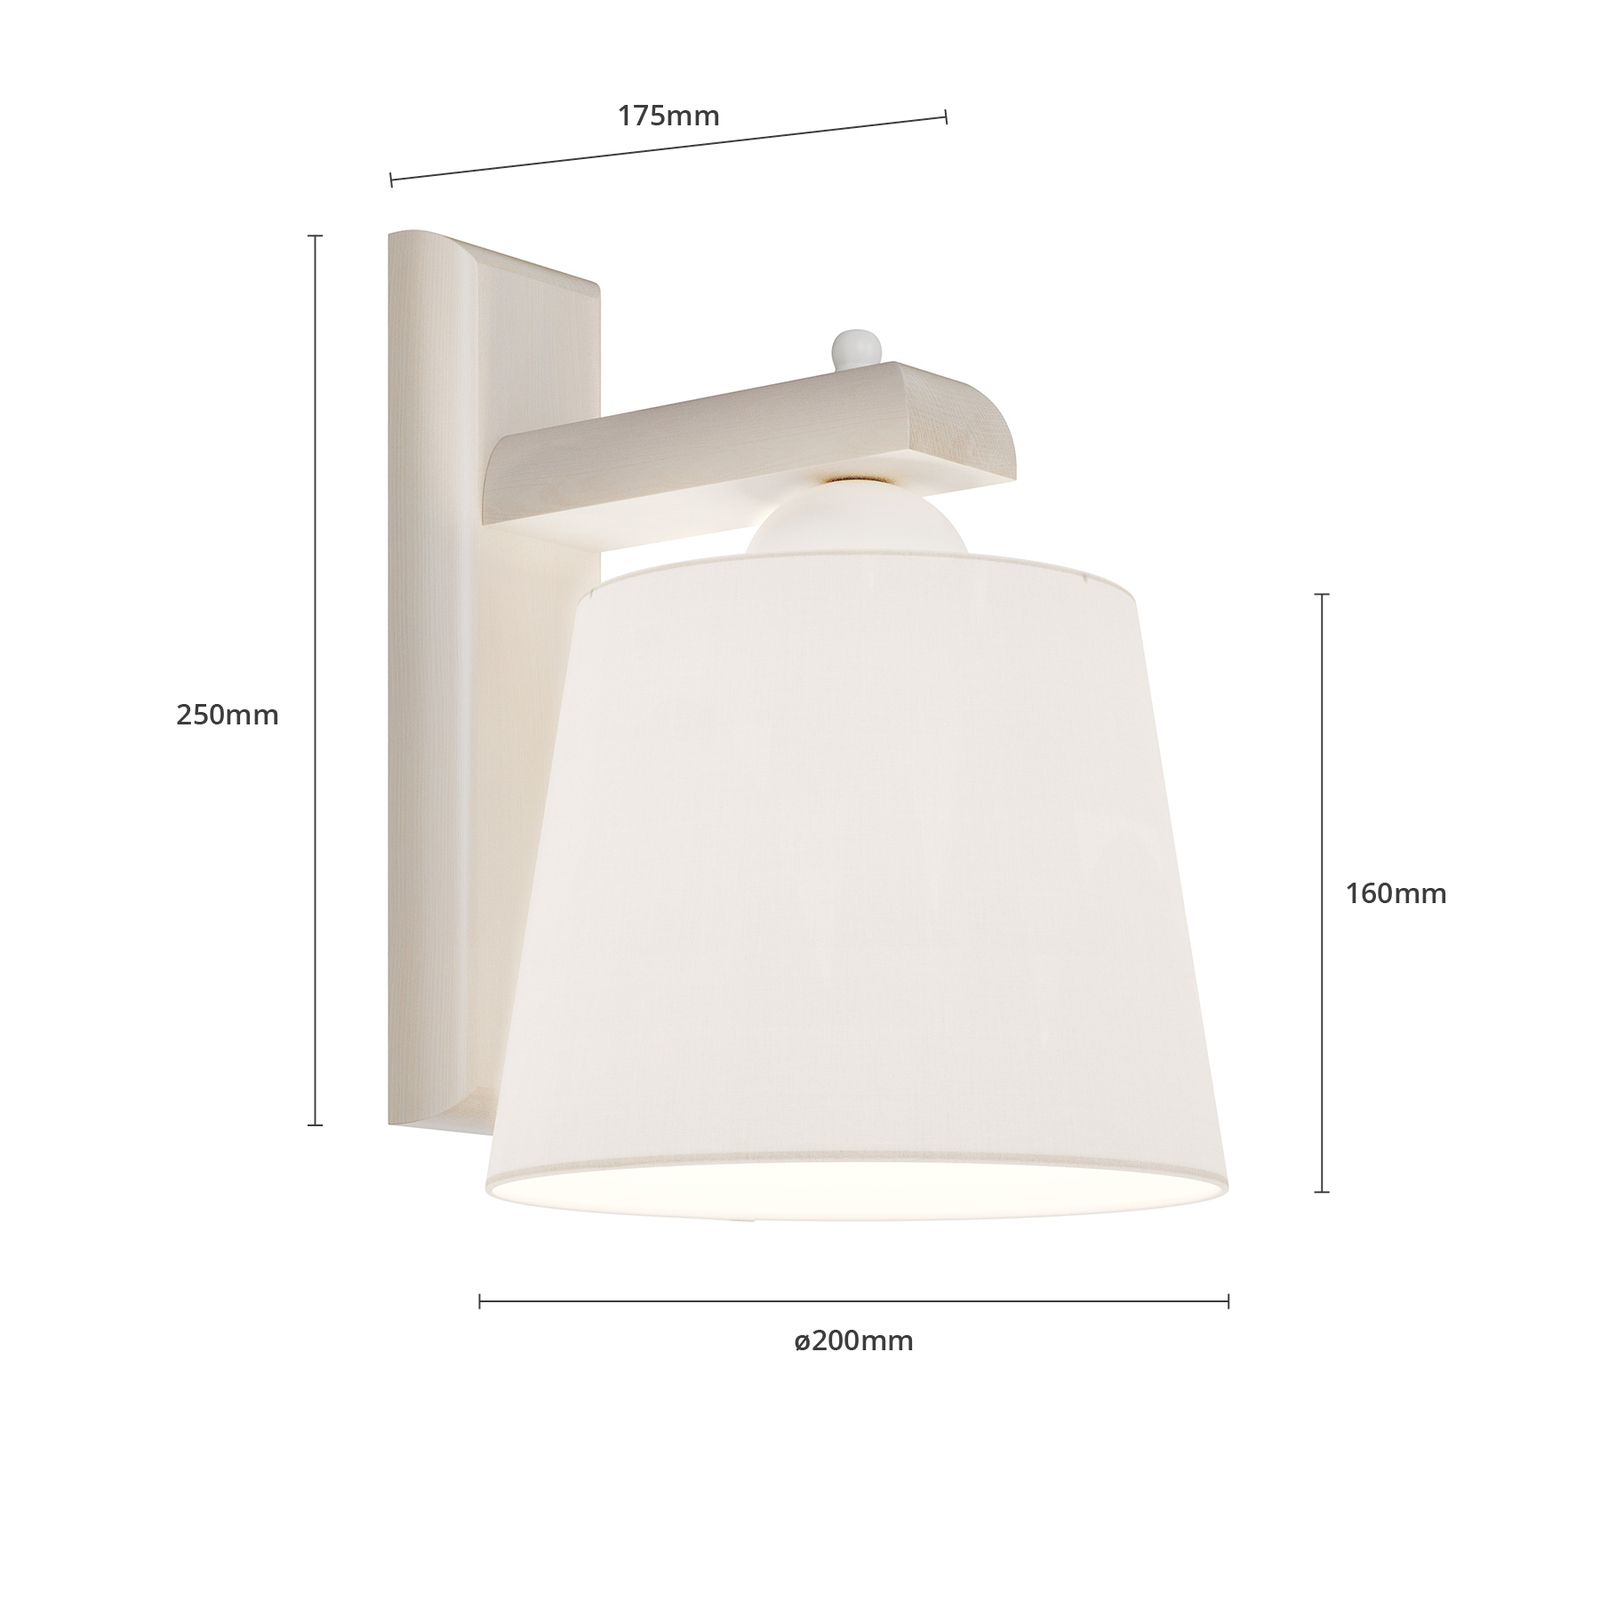 Sweden wall light with wooden frame, antique white